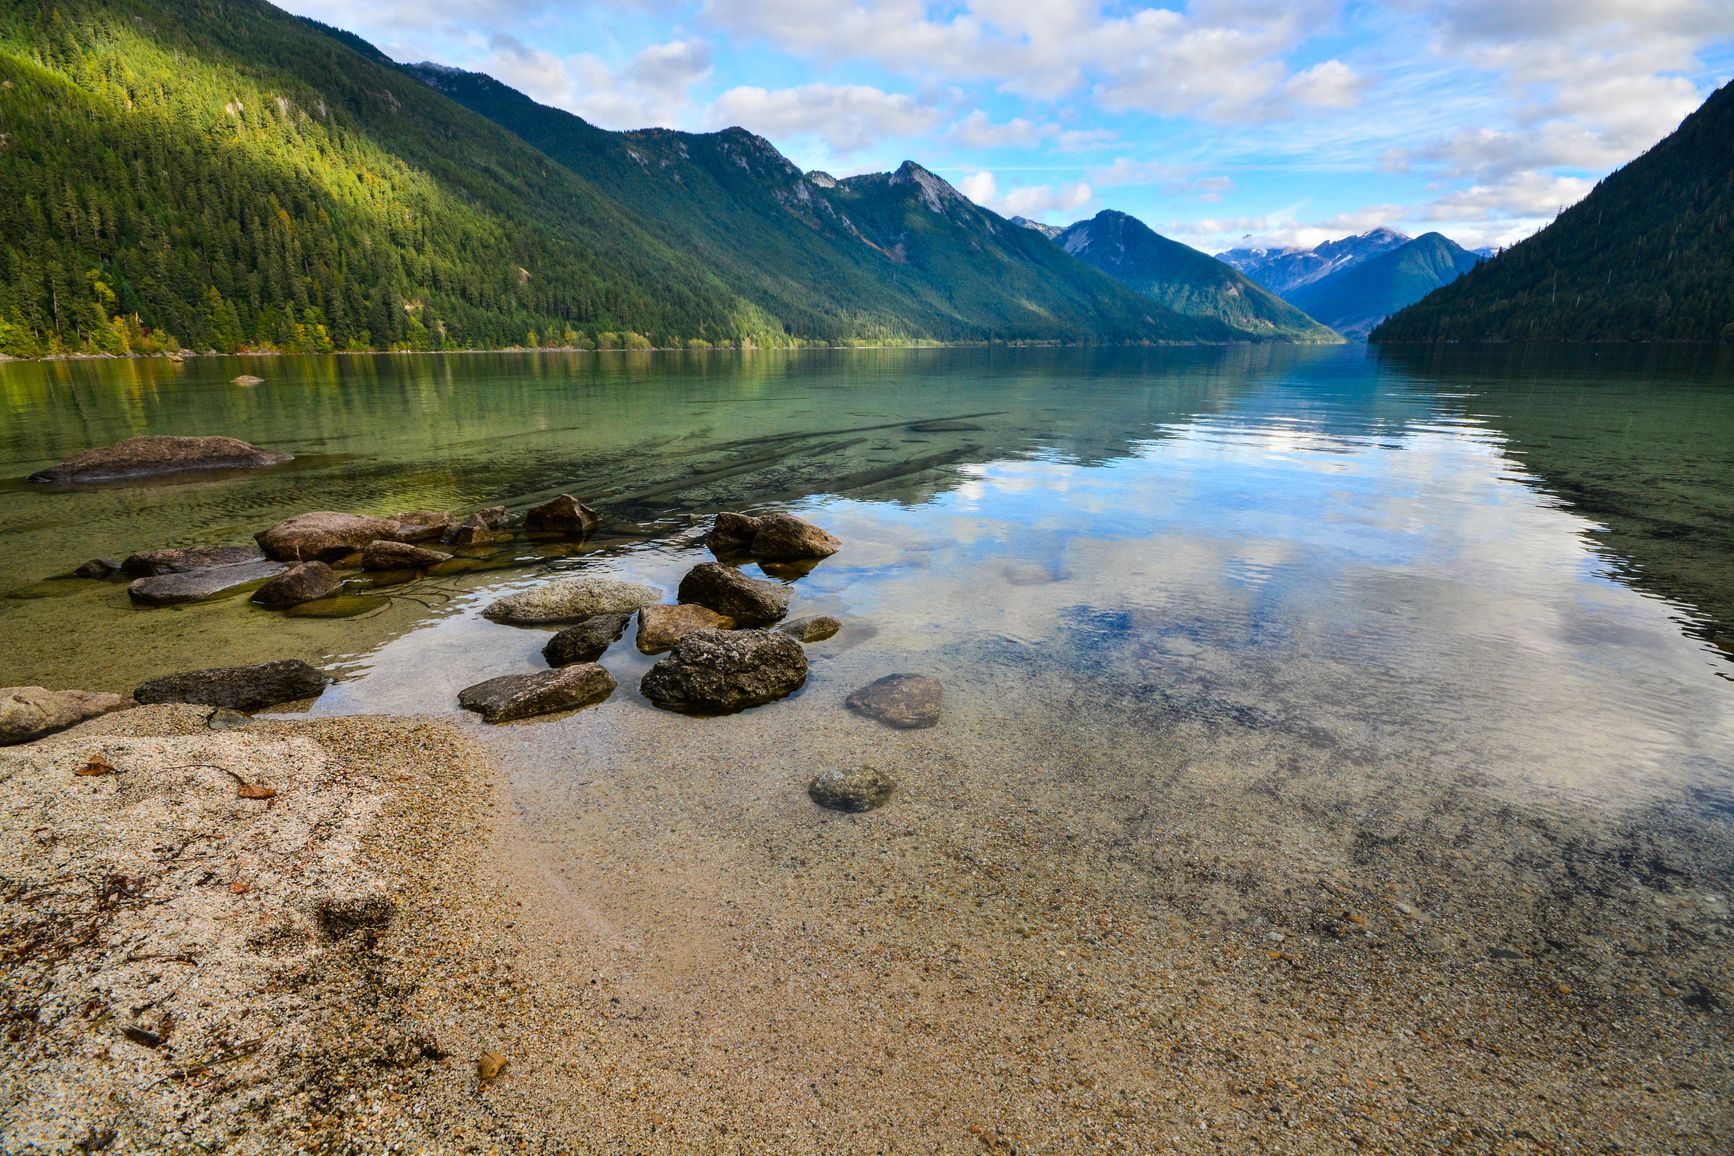 View of the forest-covered mountains from the shoreline. Sx̱ótsaqel/Chilliwack Lake Park.